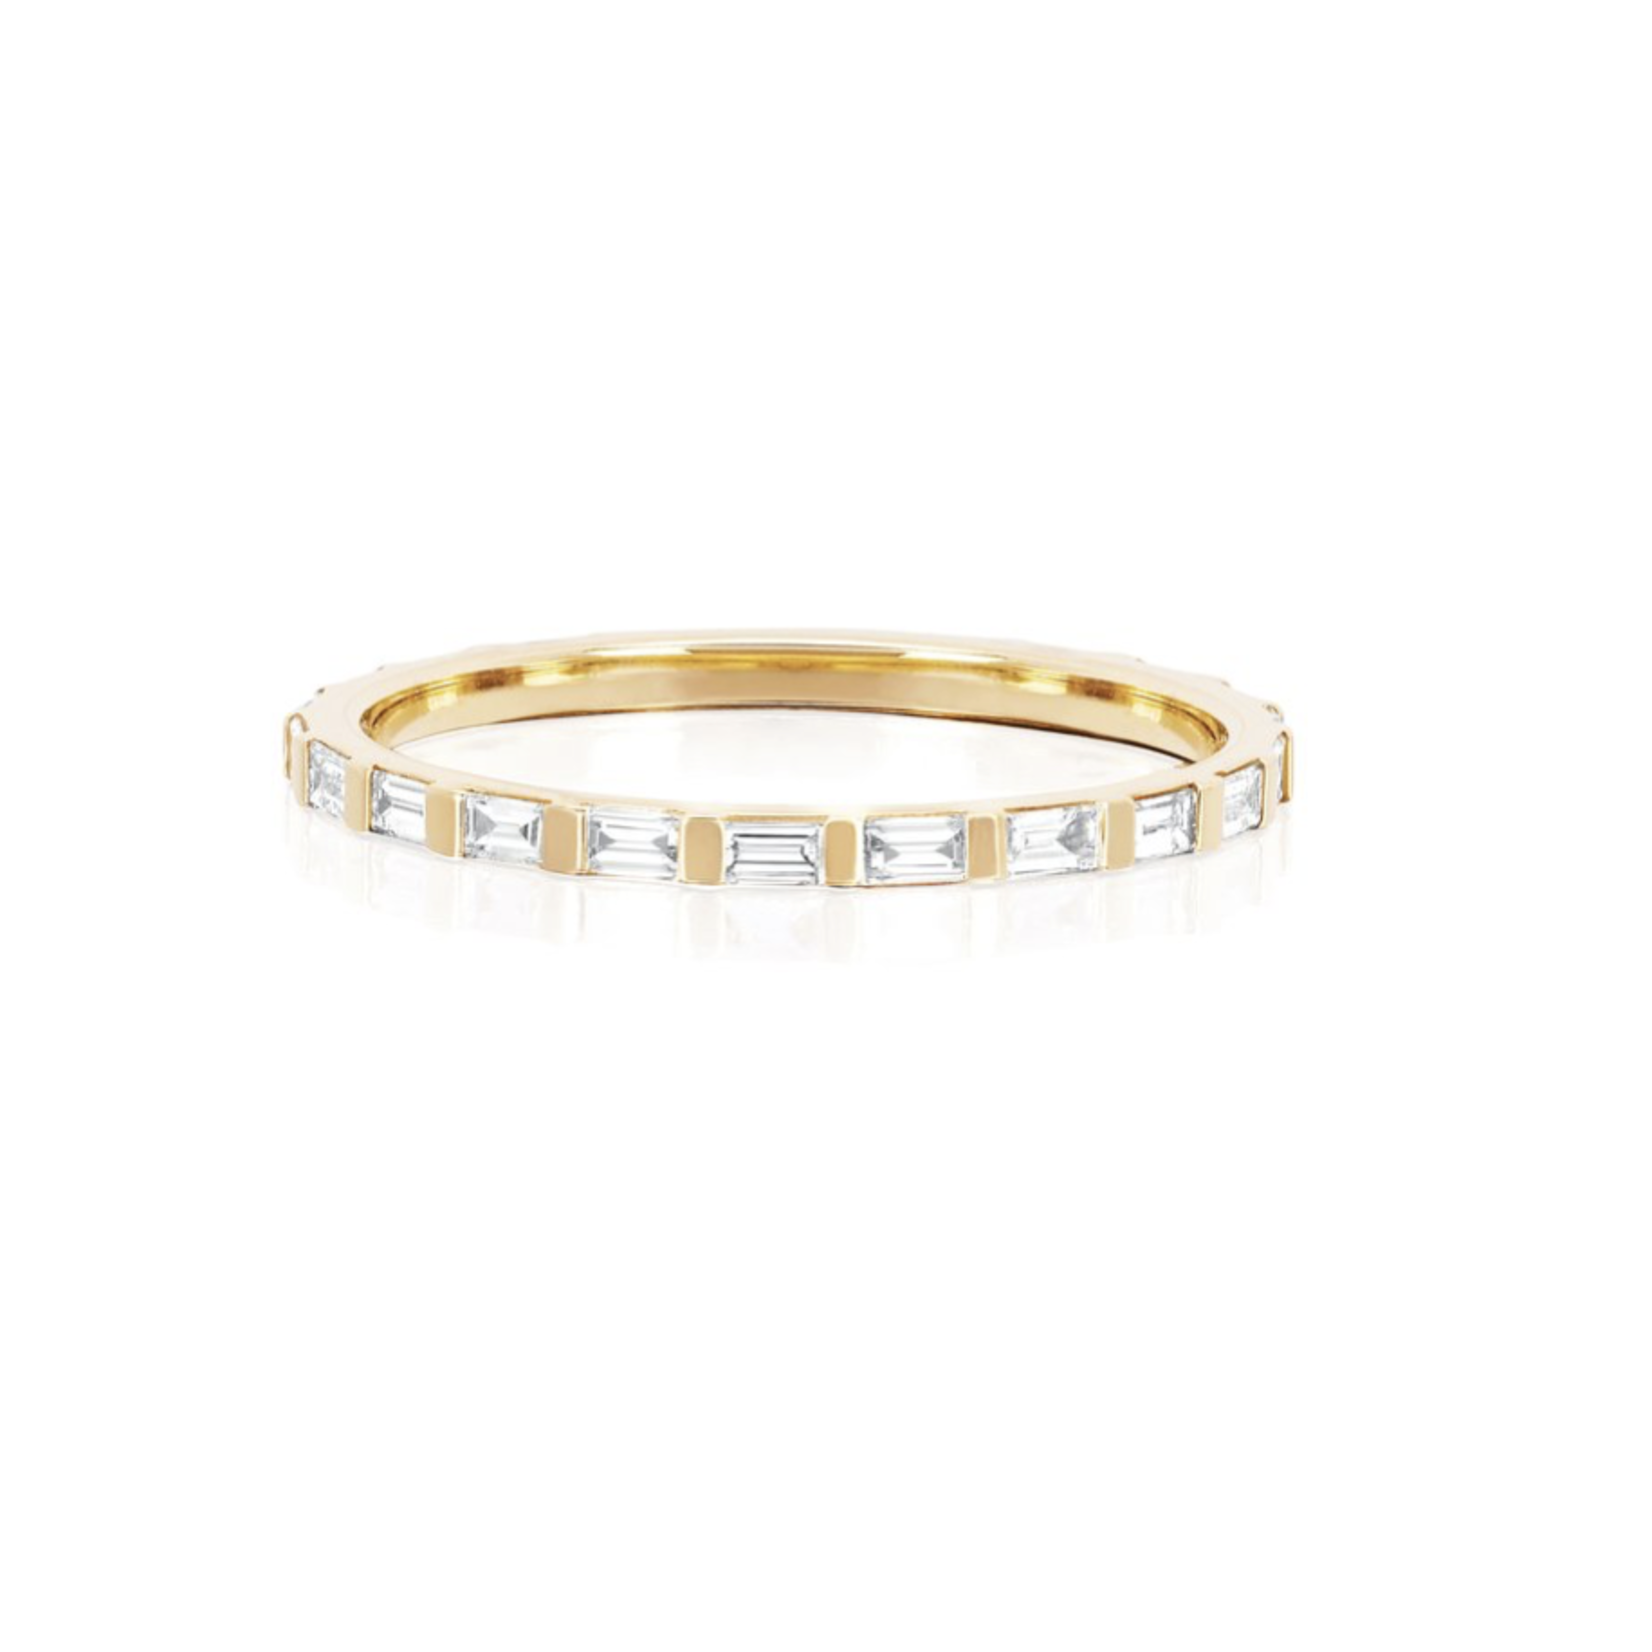 EF COLLECTION 14KY Half Diamond Baguette Eternity Ring -Size 7